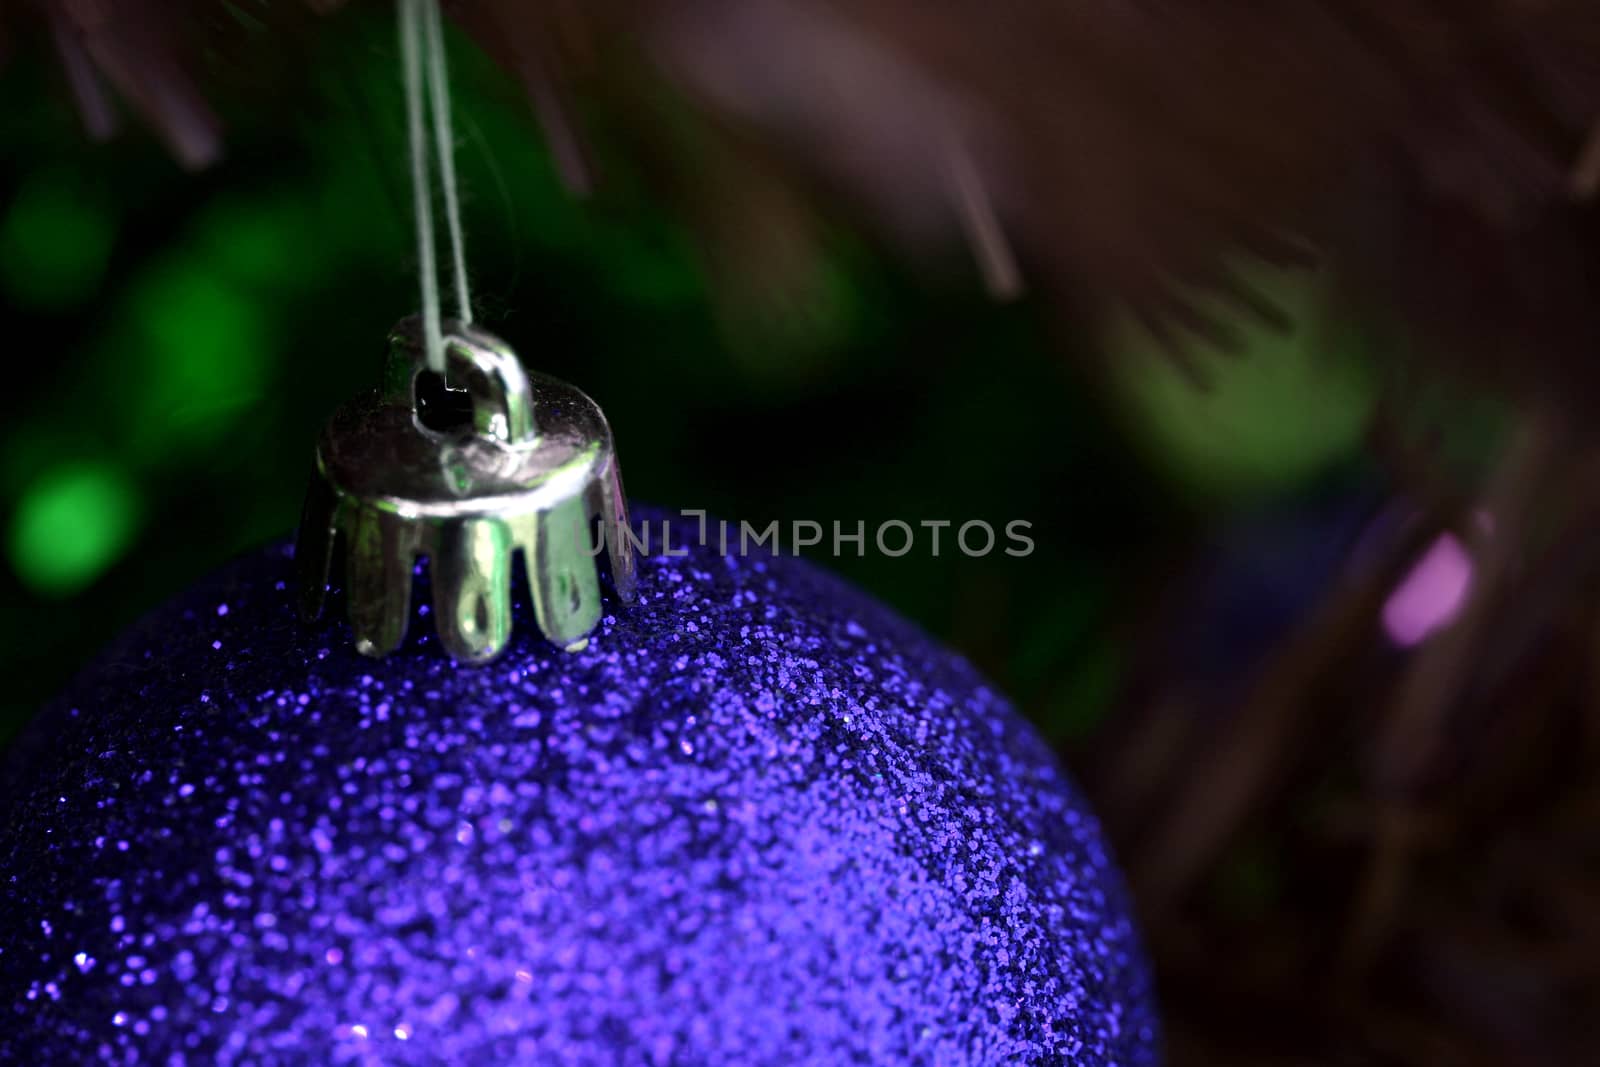 Christmas ornaments on tree. by arosoft